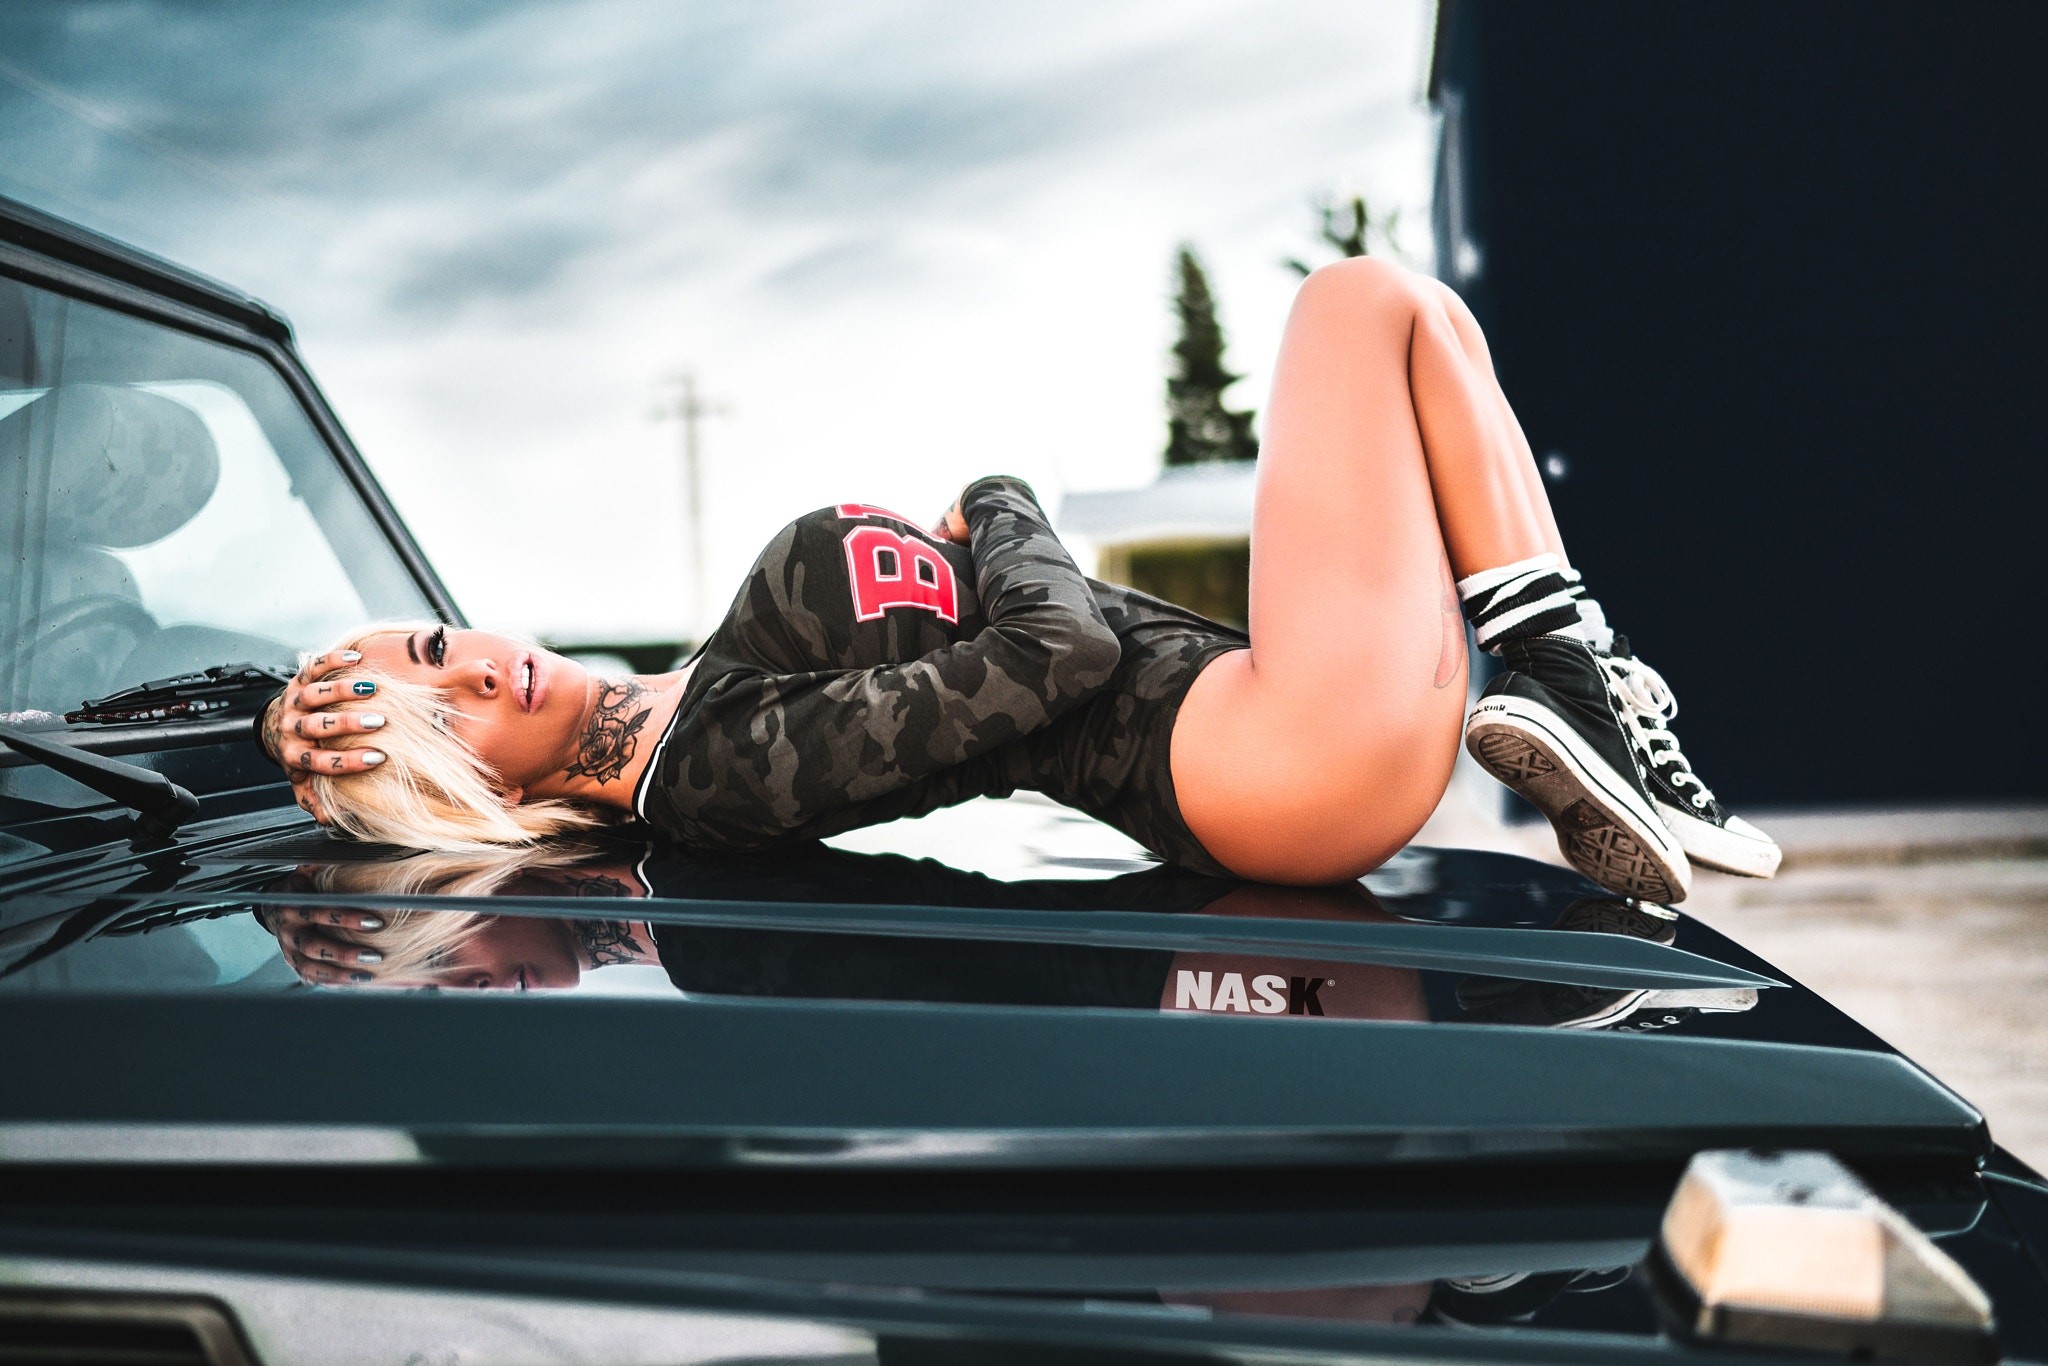 People 2048x1366 women Nask Nach car ass painted nails tanned sneakers leotard tattoo women outdoors reflection Chloe Gimenez women with cars